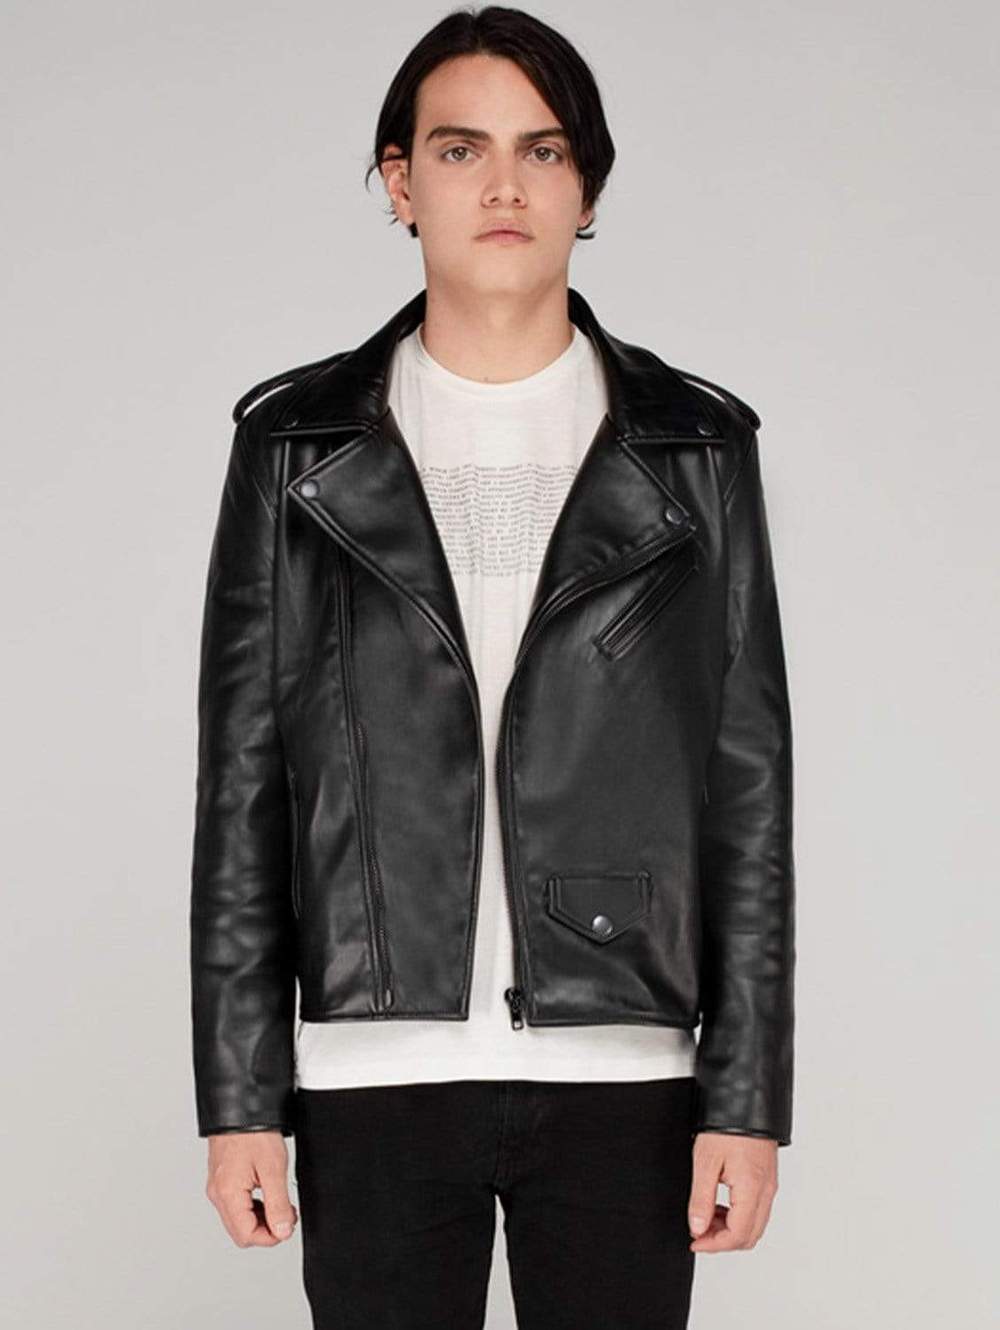 The Best Vegan Leather Jacket, from Biker to Bomber Jackets - The 